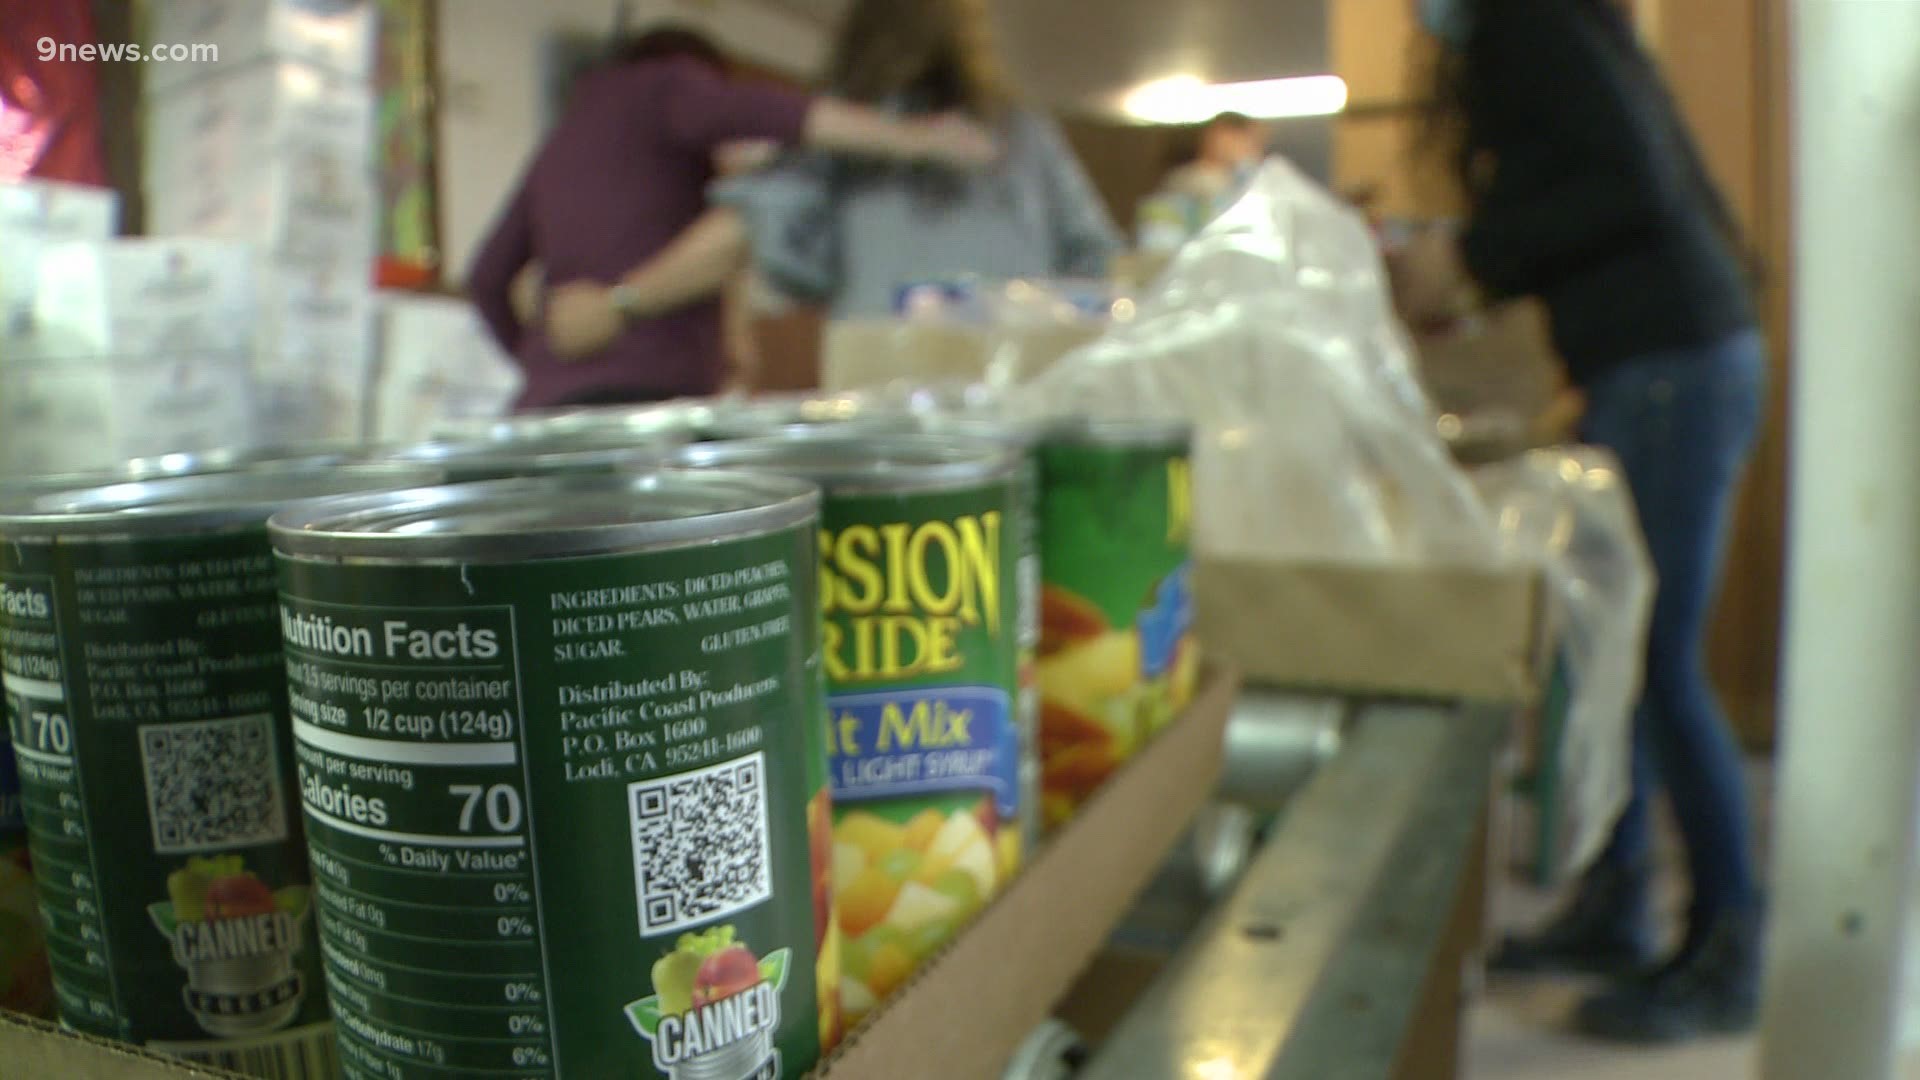 With students spending last year learning at home, grocery bills have gone up for many families. A local food pantry in Denver is stepping up to help.